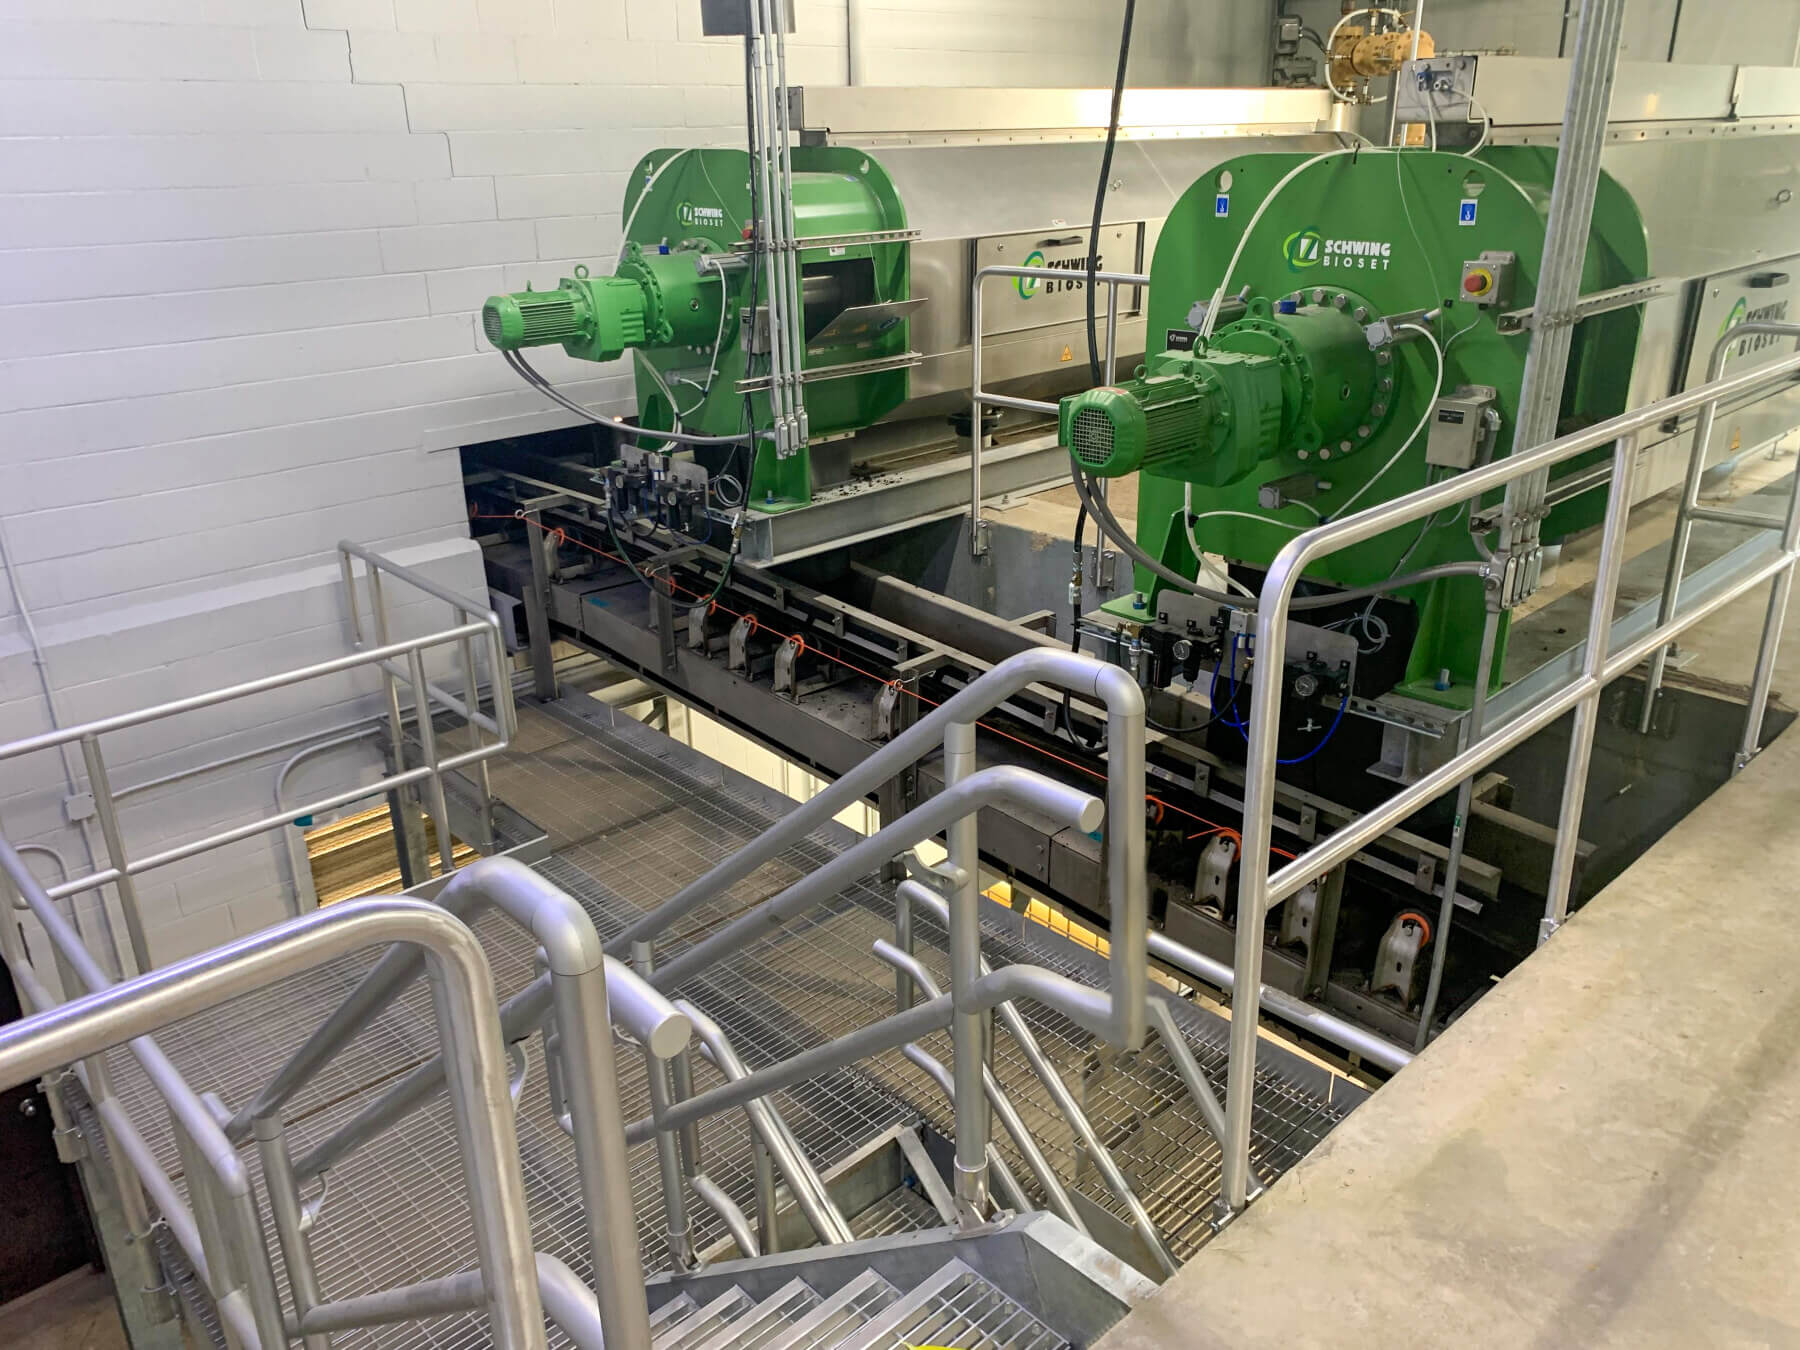 Two new screw-press dewatering units at Shelton Road Wastewater Treatment Plant.